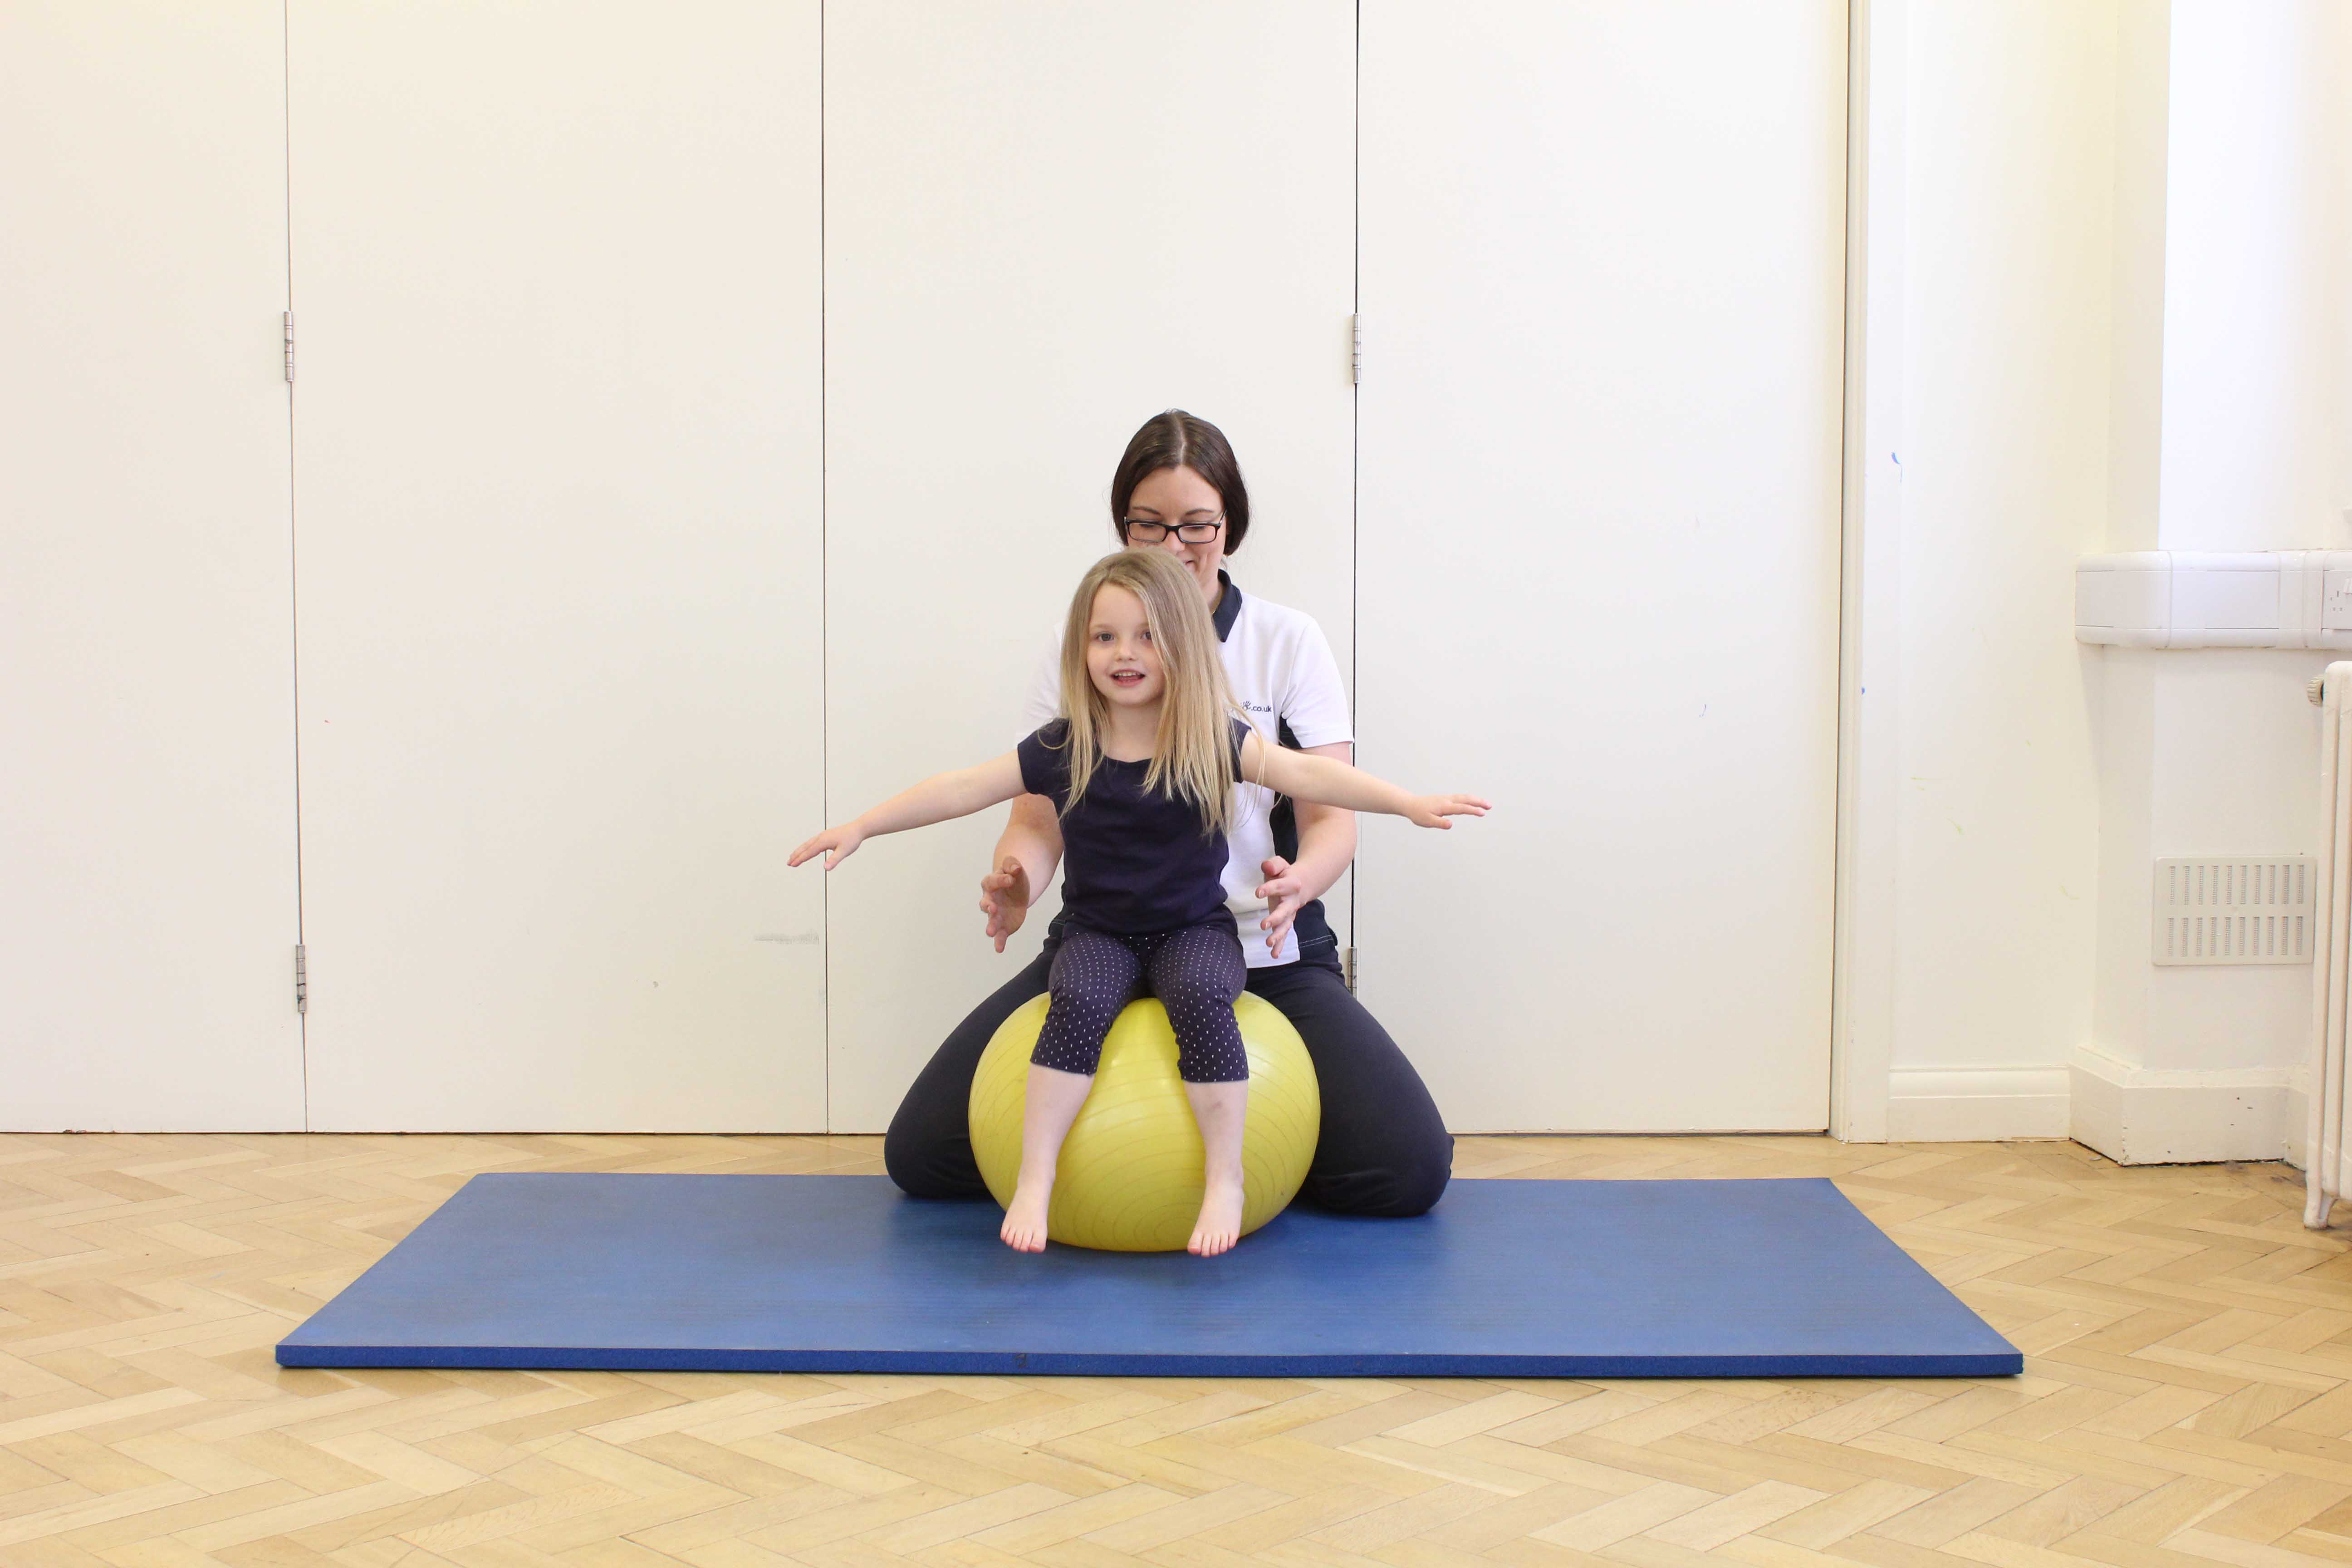 Trainig sitting balance and core stability on a gym ball under close supervision of a paediatric physiotherapist